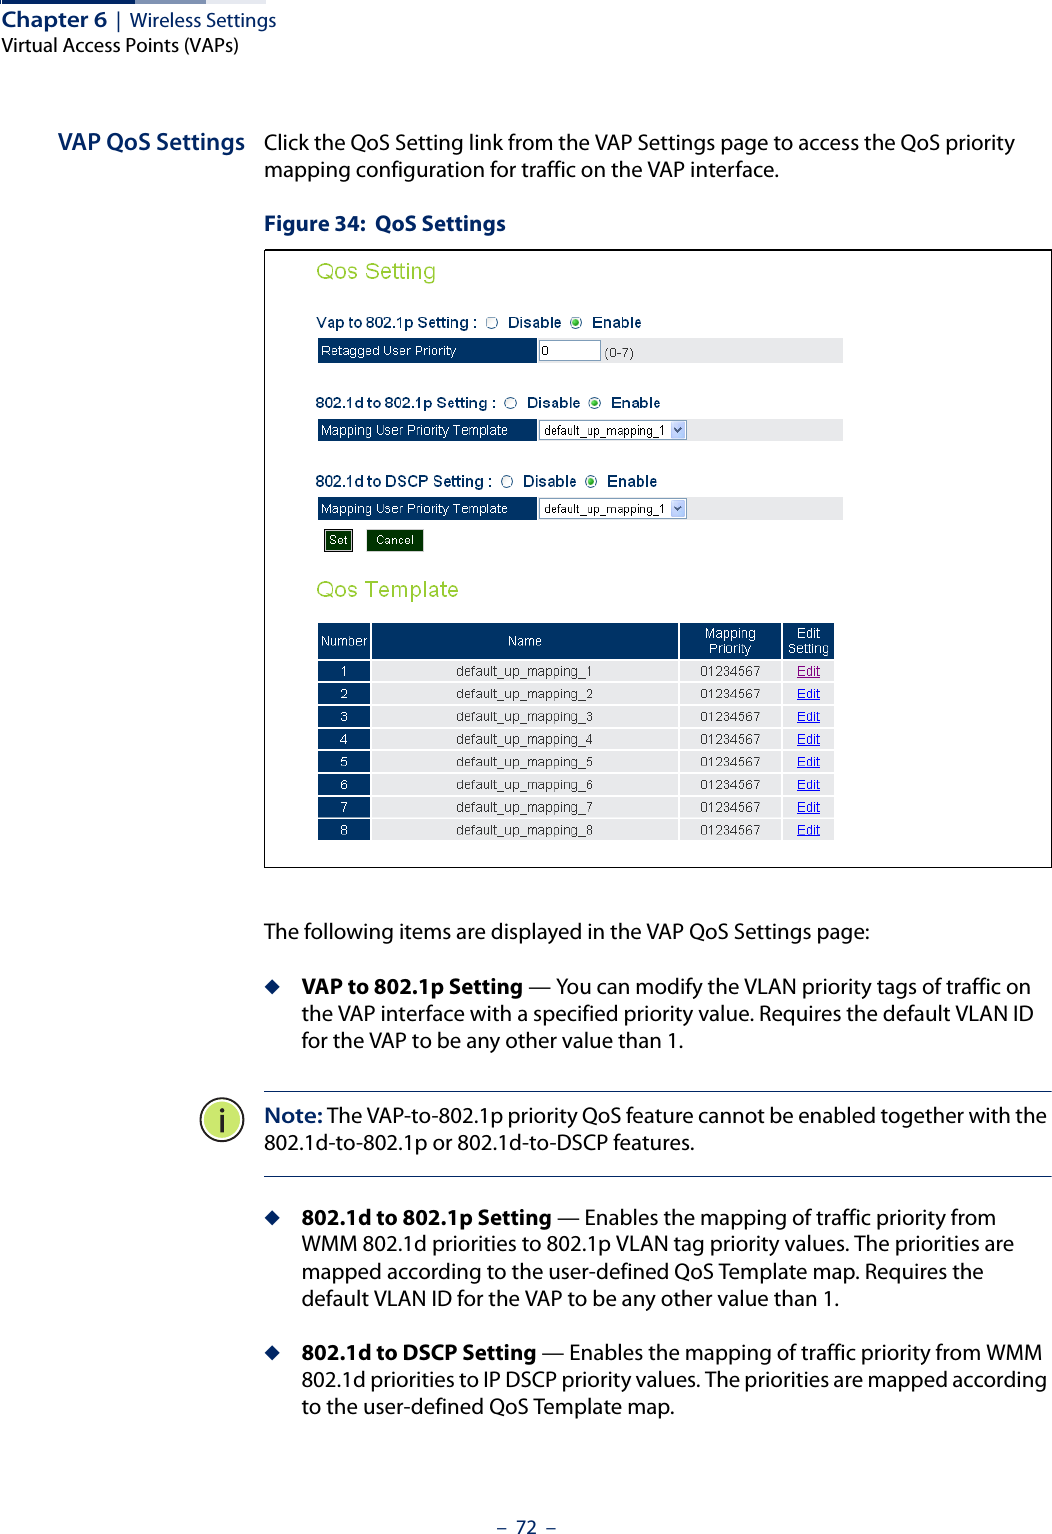 Chapter 6  |  Wireless SettingsVirtual Access Points (VAPs)–  72  –VAP QoS Settings Click the QoS Setting link from the VAP Settings page to access the QoS priority mapping configuration for traffic on the VAP interface.Figure 34:  QoS SettingsThe following items are displayed in the VAP QoS Settings page:◆VAP to 802.1p Setting — You can modify the VLAN priority tags of traffic on the VAP interface with a specified priority value. Requires the default VLAN ID for the VAP to be any other value than 1. Note: The VAP-to-802.1p priority QoS feature cannot be enabled together with the 802.1d-to-802.1p or 802.1d-to-DSCP features.◆802.1d to 802.1p Setting — Enables the mapping of traffic priority from WMM 802.1d priorities to 802.1p VLAN tag priority values. The priorities are mapped according to the user-defined QoS Template map. Requires the default VLAN ID for the VAP to be any other value than 1.◆802.1d to DSCP Setting — Enables the mapping of traffic priority from WMM 802.1d priorities to IP DSCP priority values. The priorities are mapped according to the user-defined QoS Template map. 